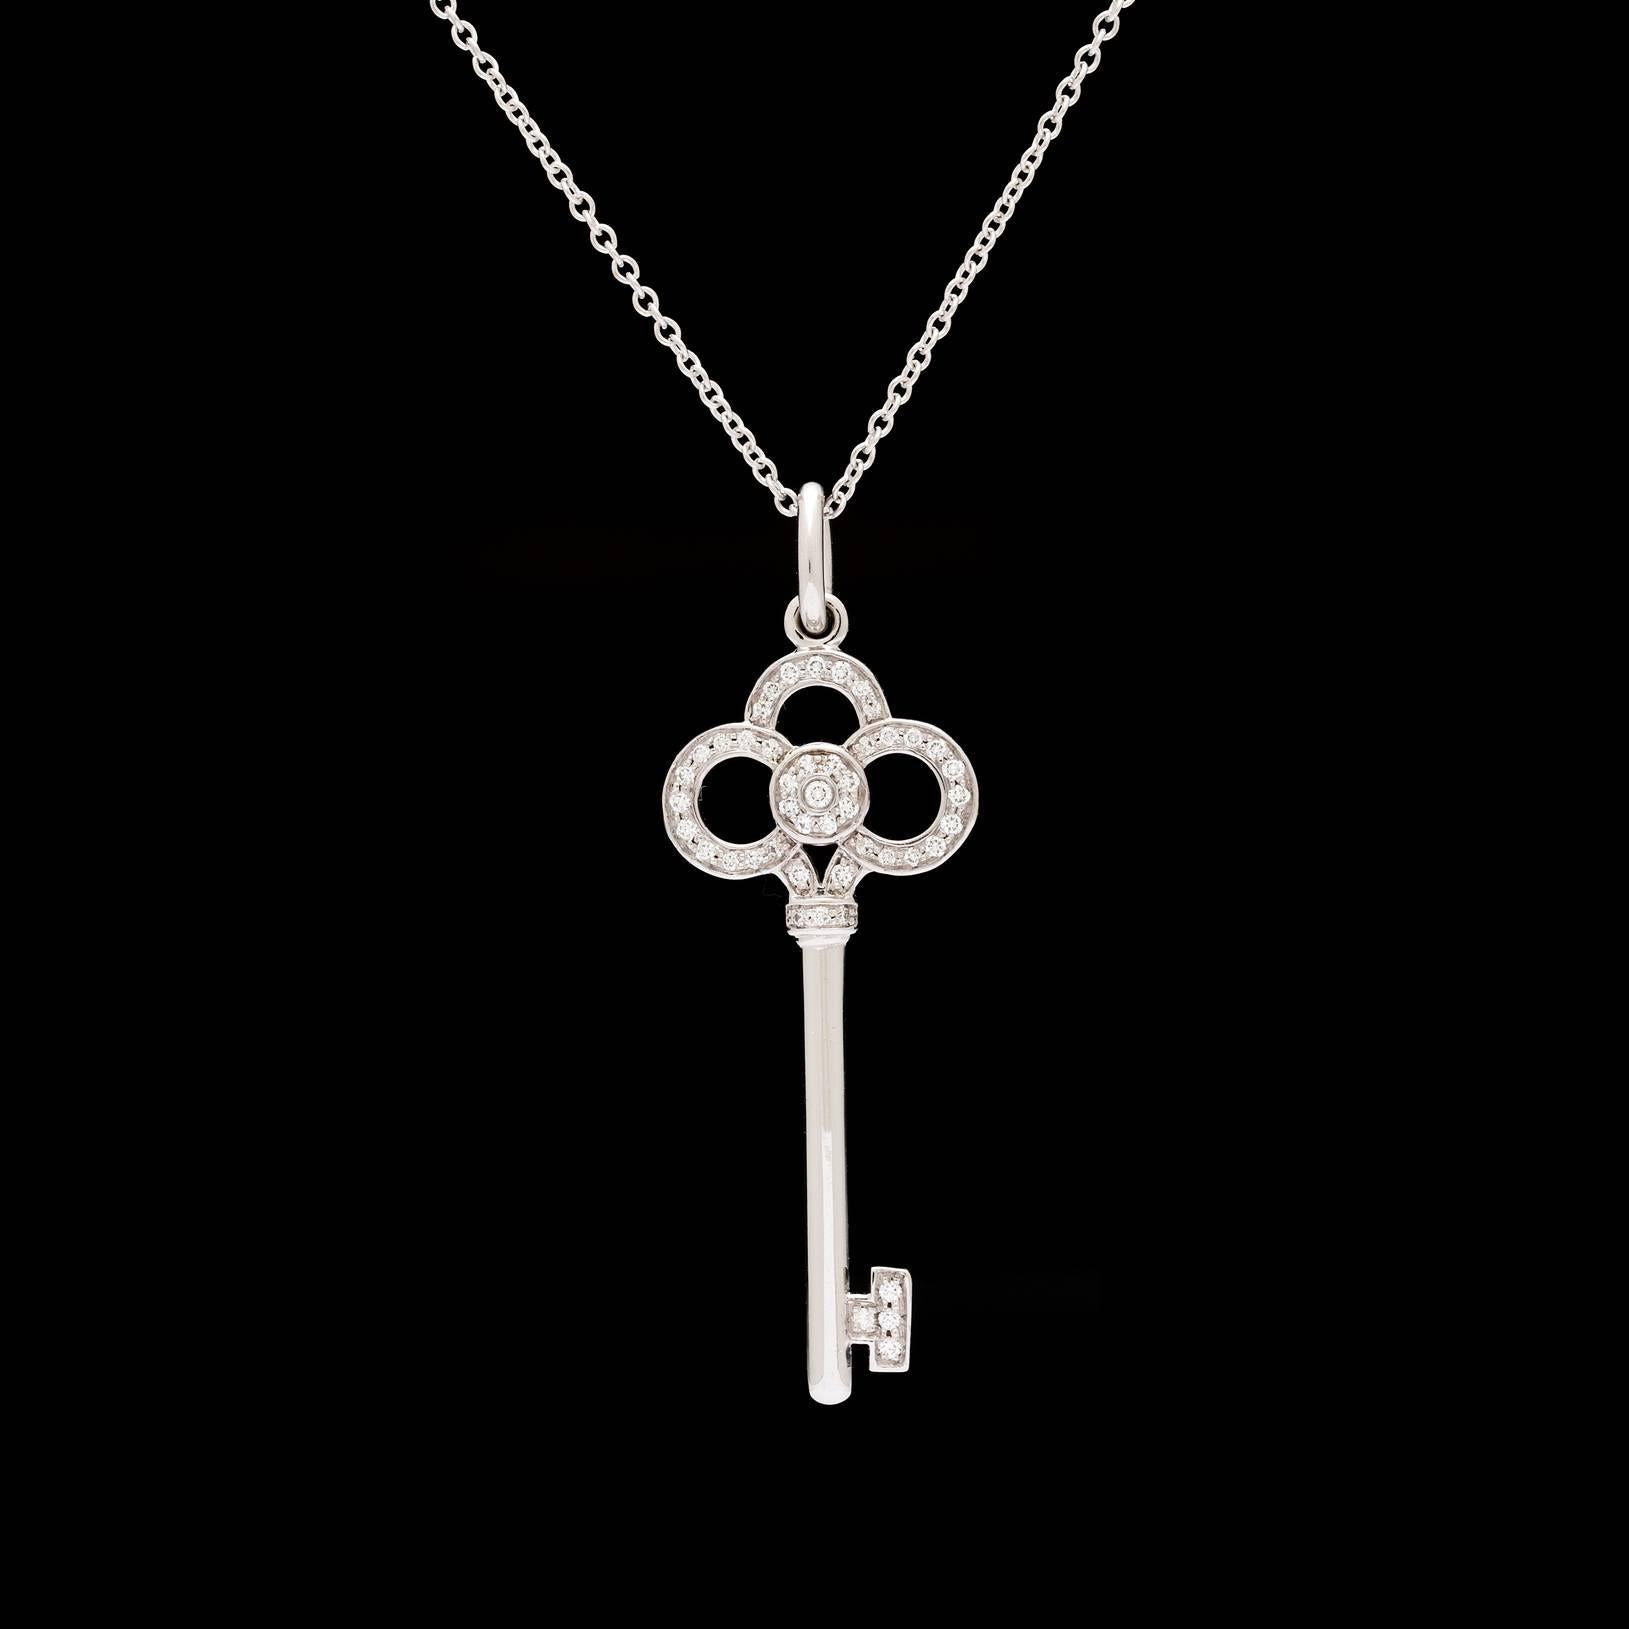 Tiffany & Co. Crown Key collection in 18k white gold and 0.25 carats of round brilliant diamonds. The key pendant measures 1.25″ and chain measures 16″. Total item weight is 4.8 grams. 